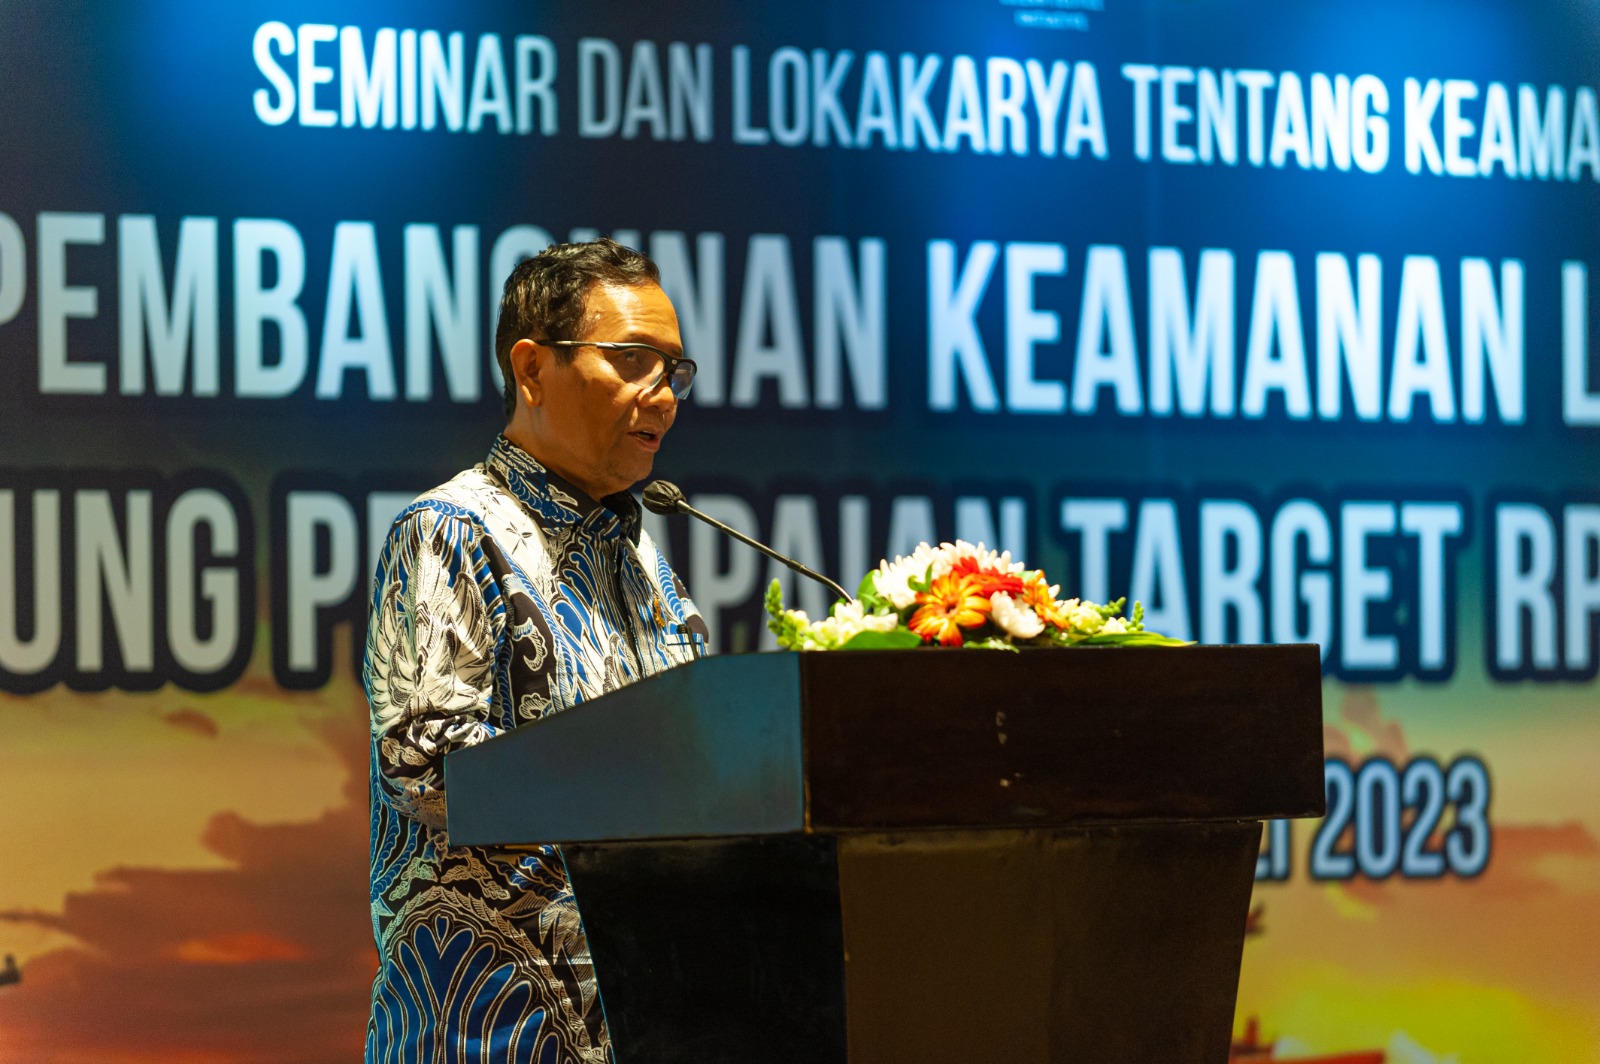 Building an Indonesian Maritime Security System to Oversee Indonesia’s Long Term Development Plans 2025 – 2045